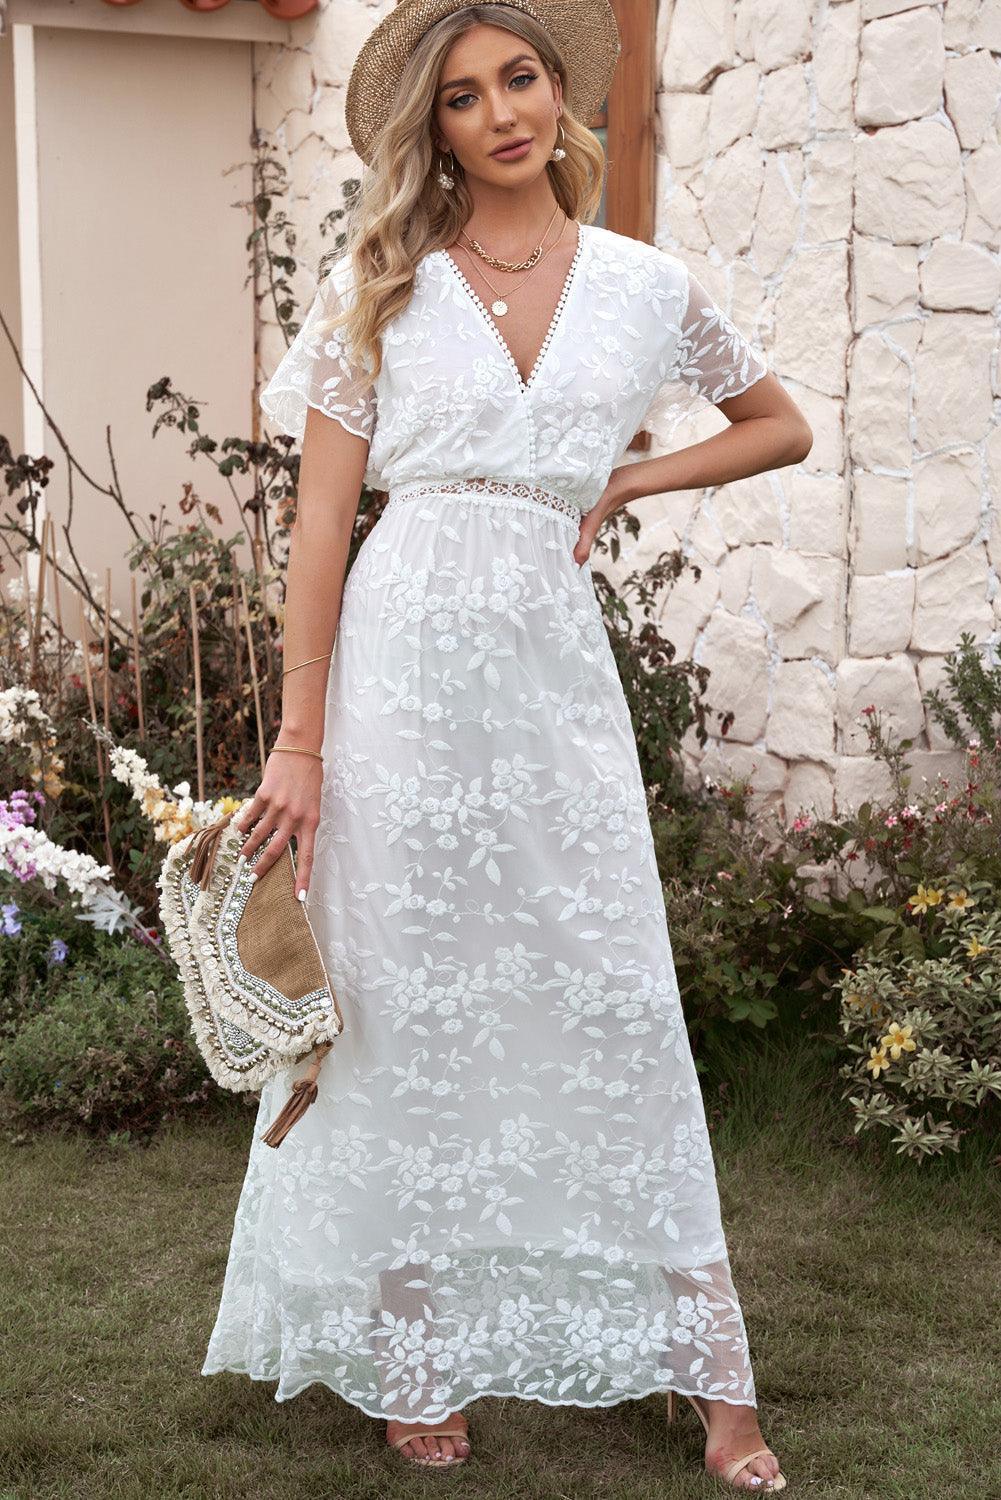 Marry Me Embroidered White Lace Maxi Dress - MXSTUDIO.COM